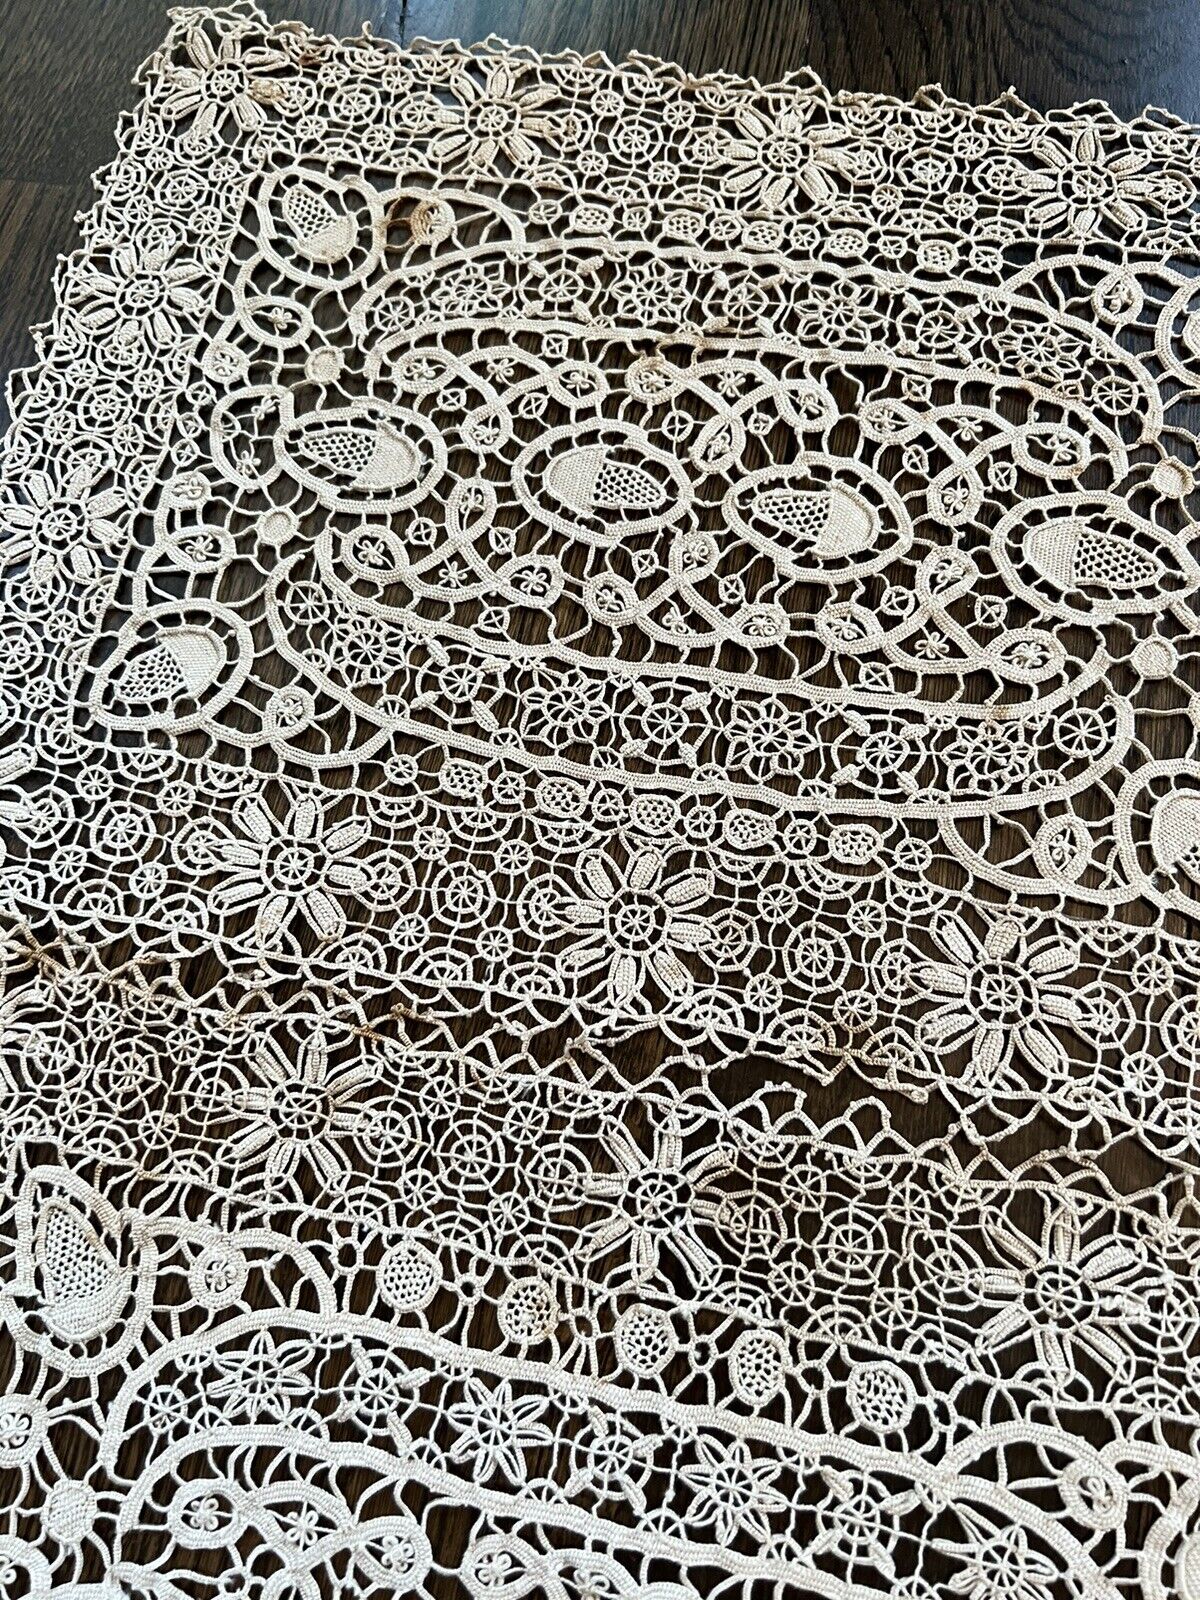 Antique Italian Hand Made Reticella Lace Set Of 8 Place Table Mats 